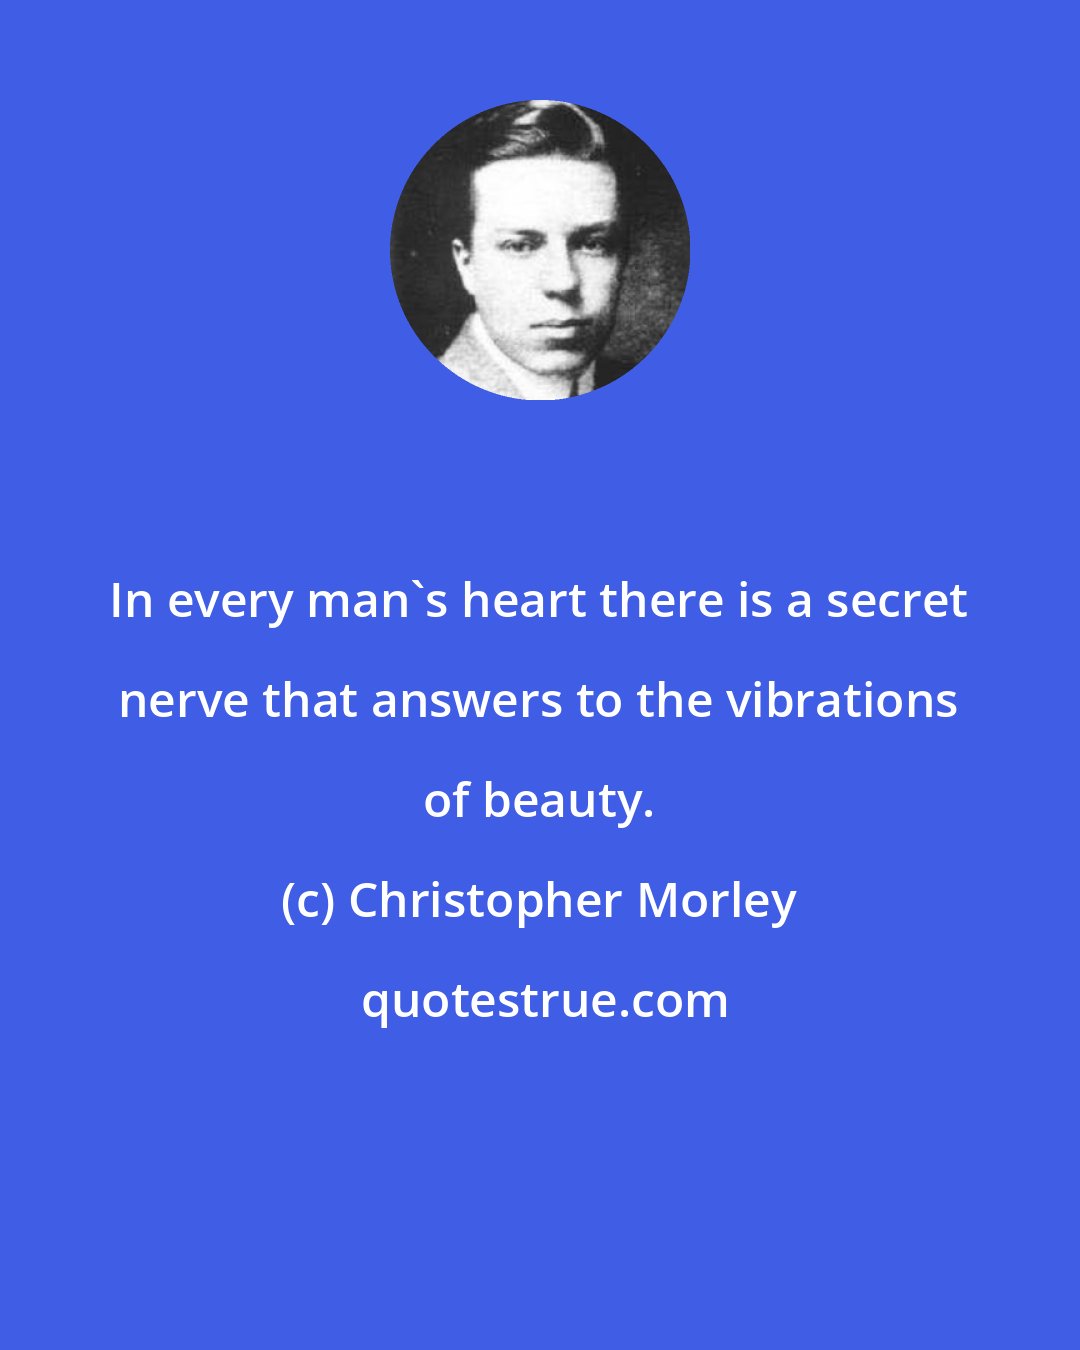 Christopher Morley: In every man's heart there is a secret nerve that answers to the vibrations of beauty.